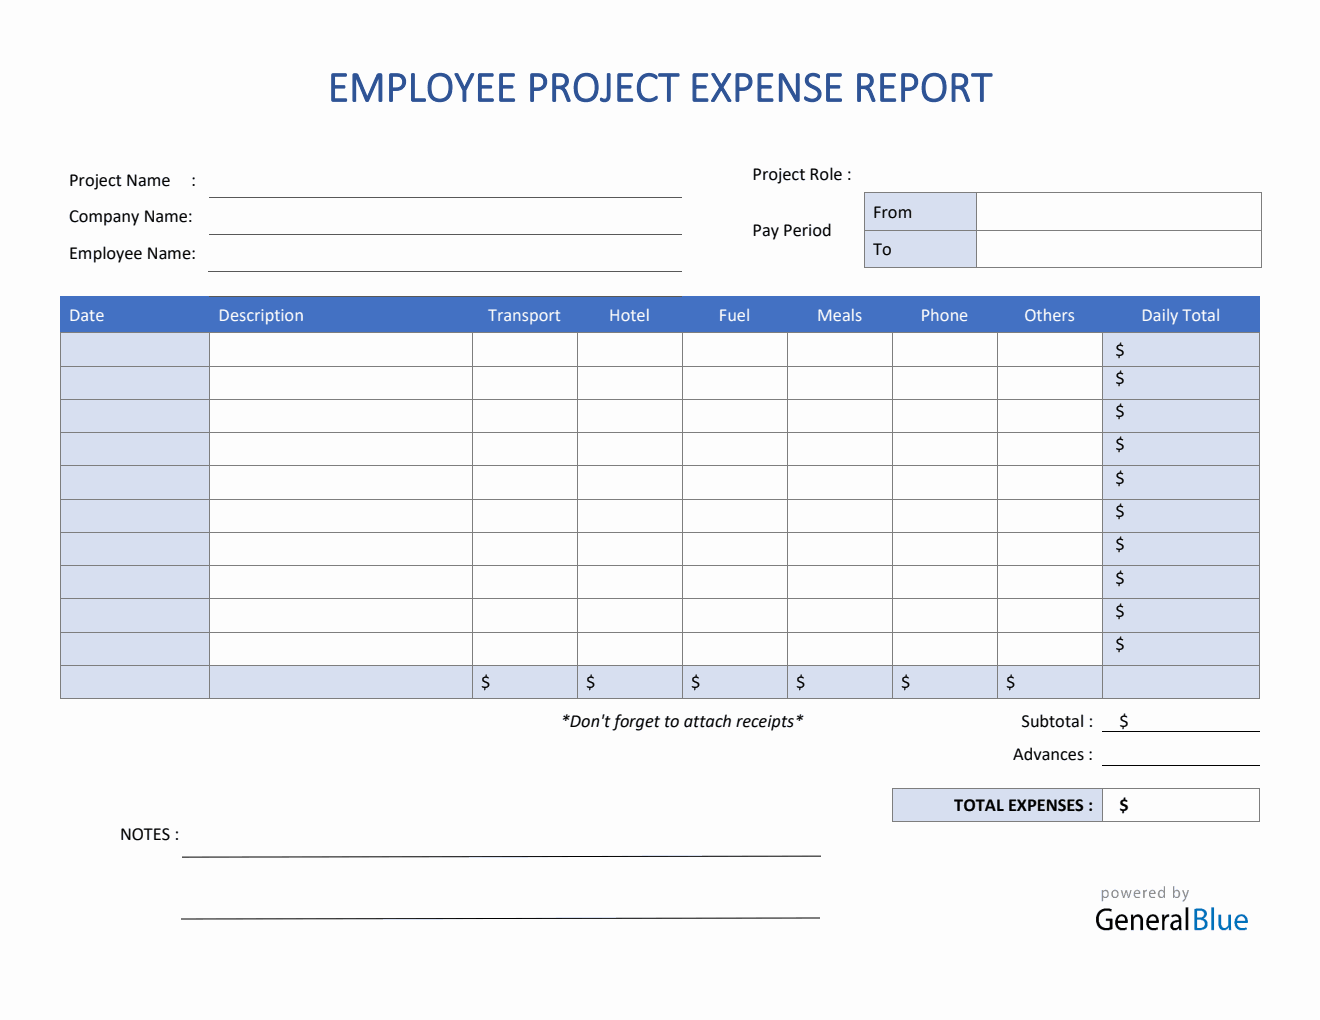 Employee Project Expense Report Template in PDF